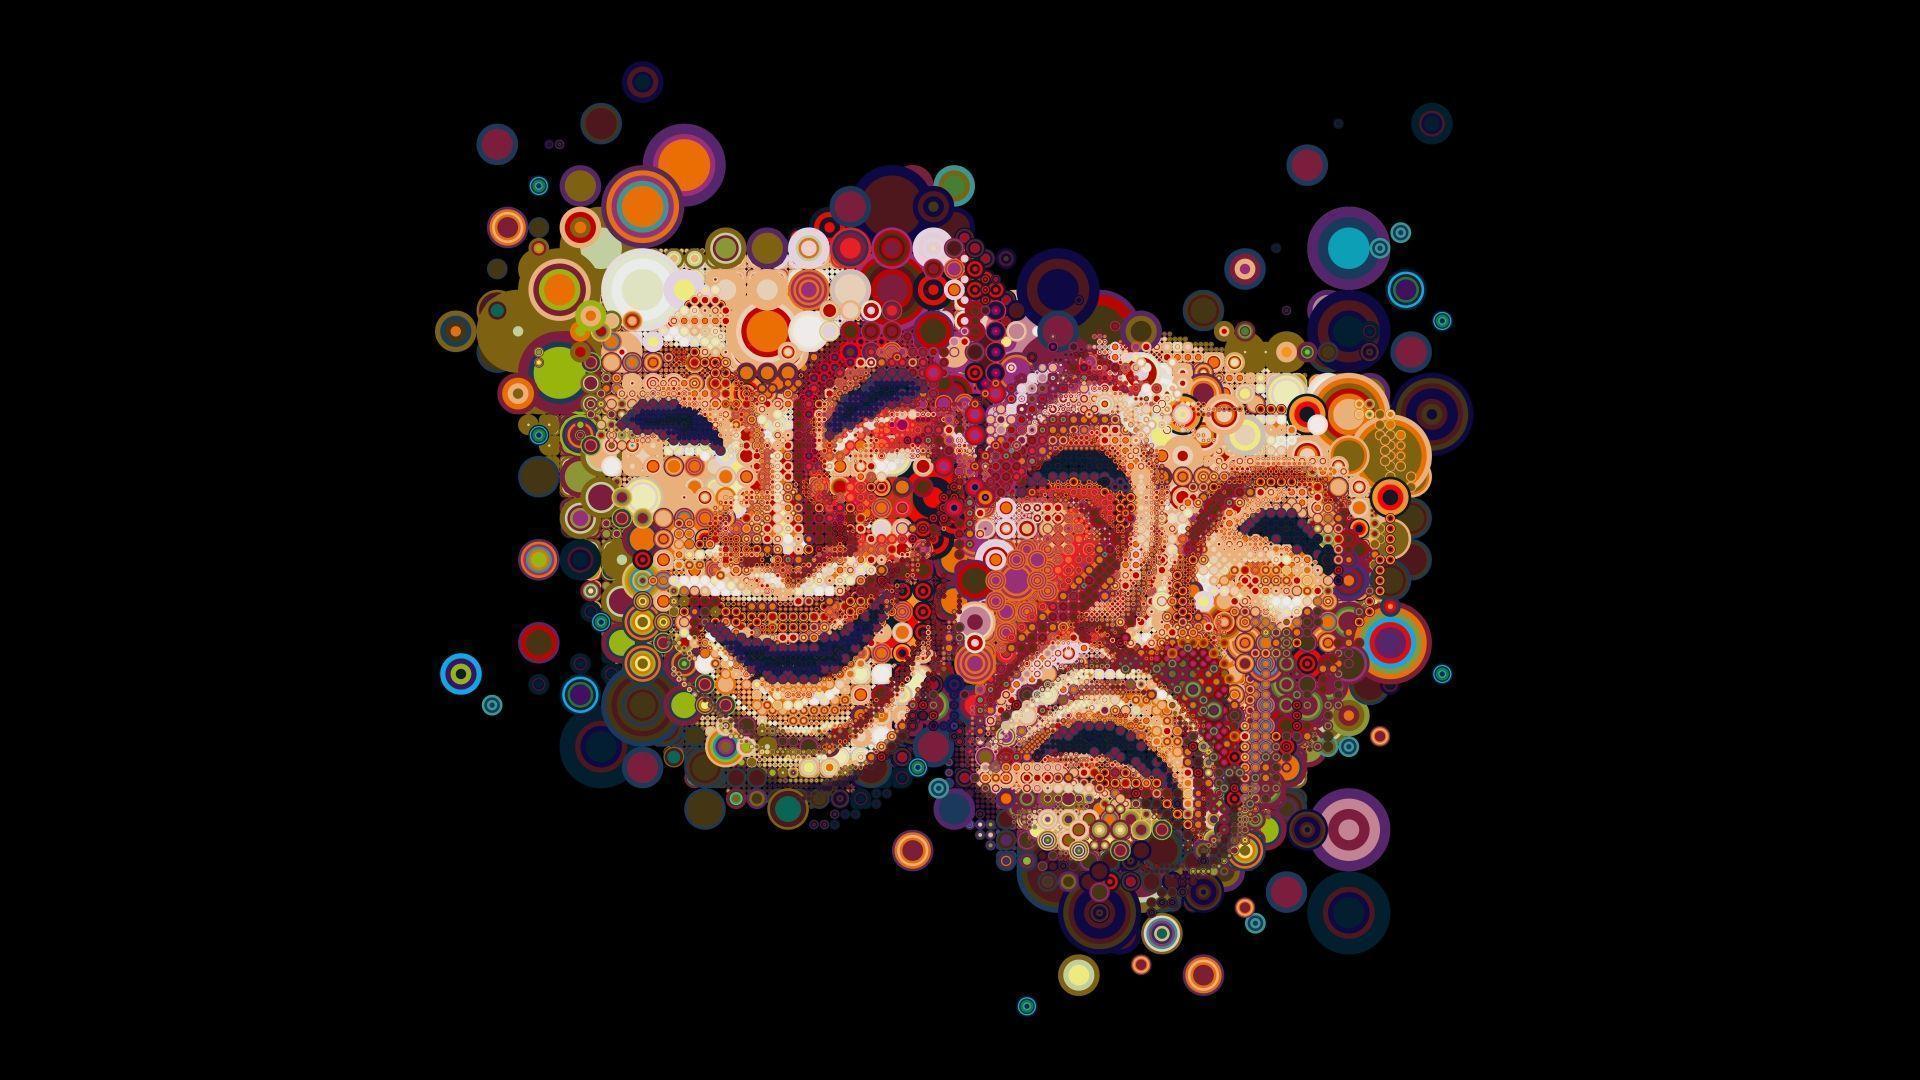 Download Wallpaper 1920x1080 Masks, Emotions, Colorful Full HD